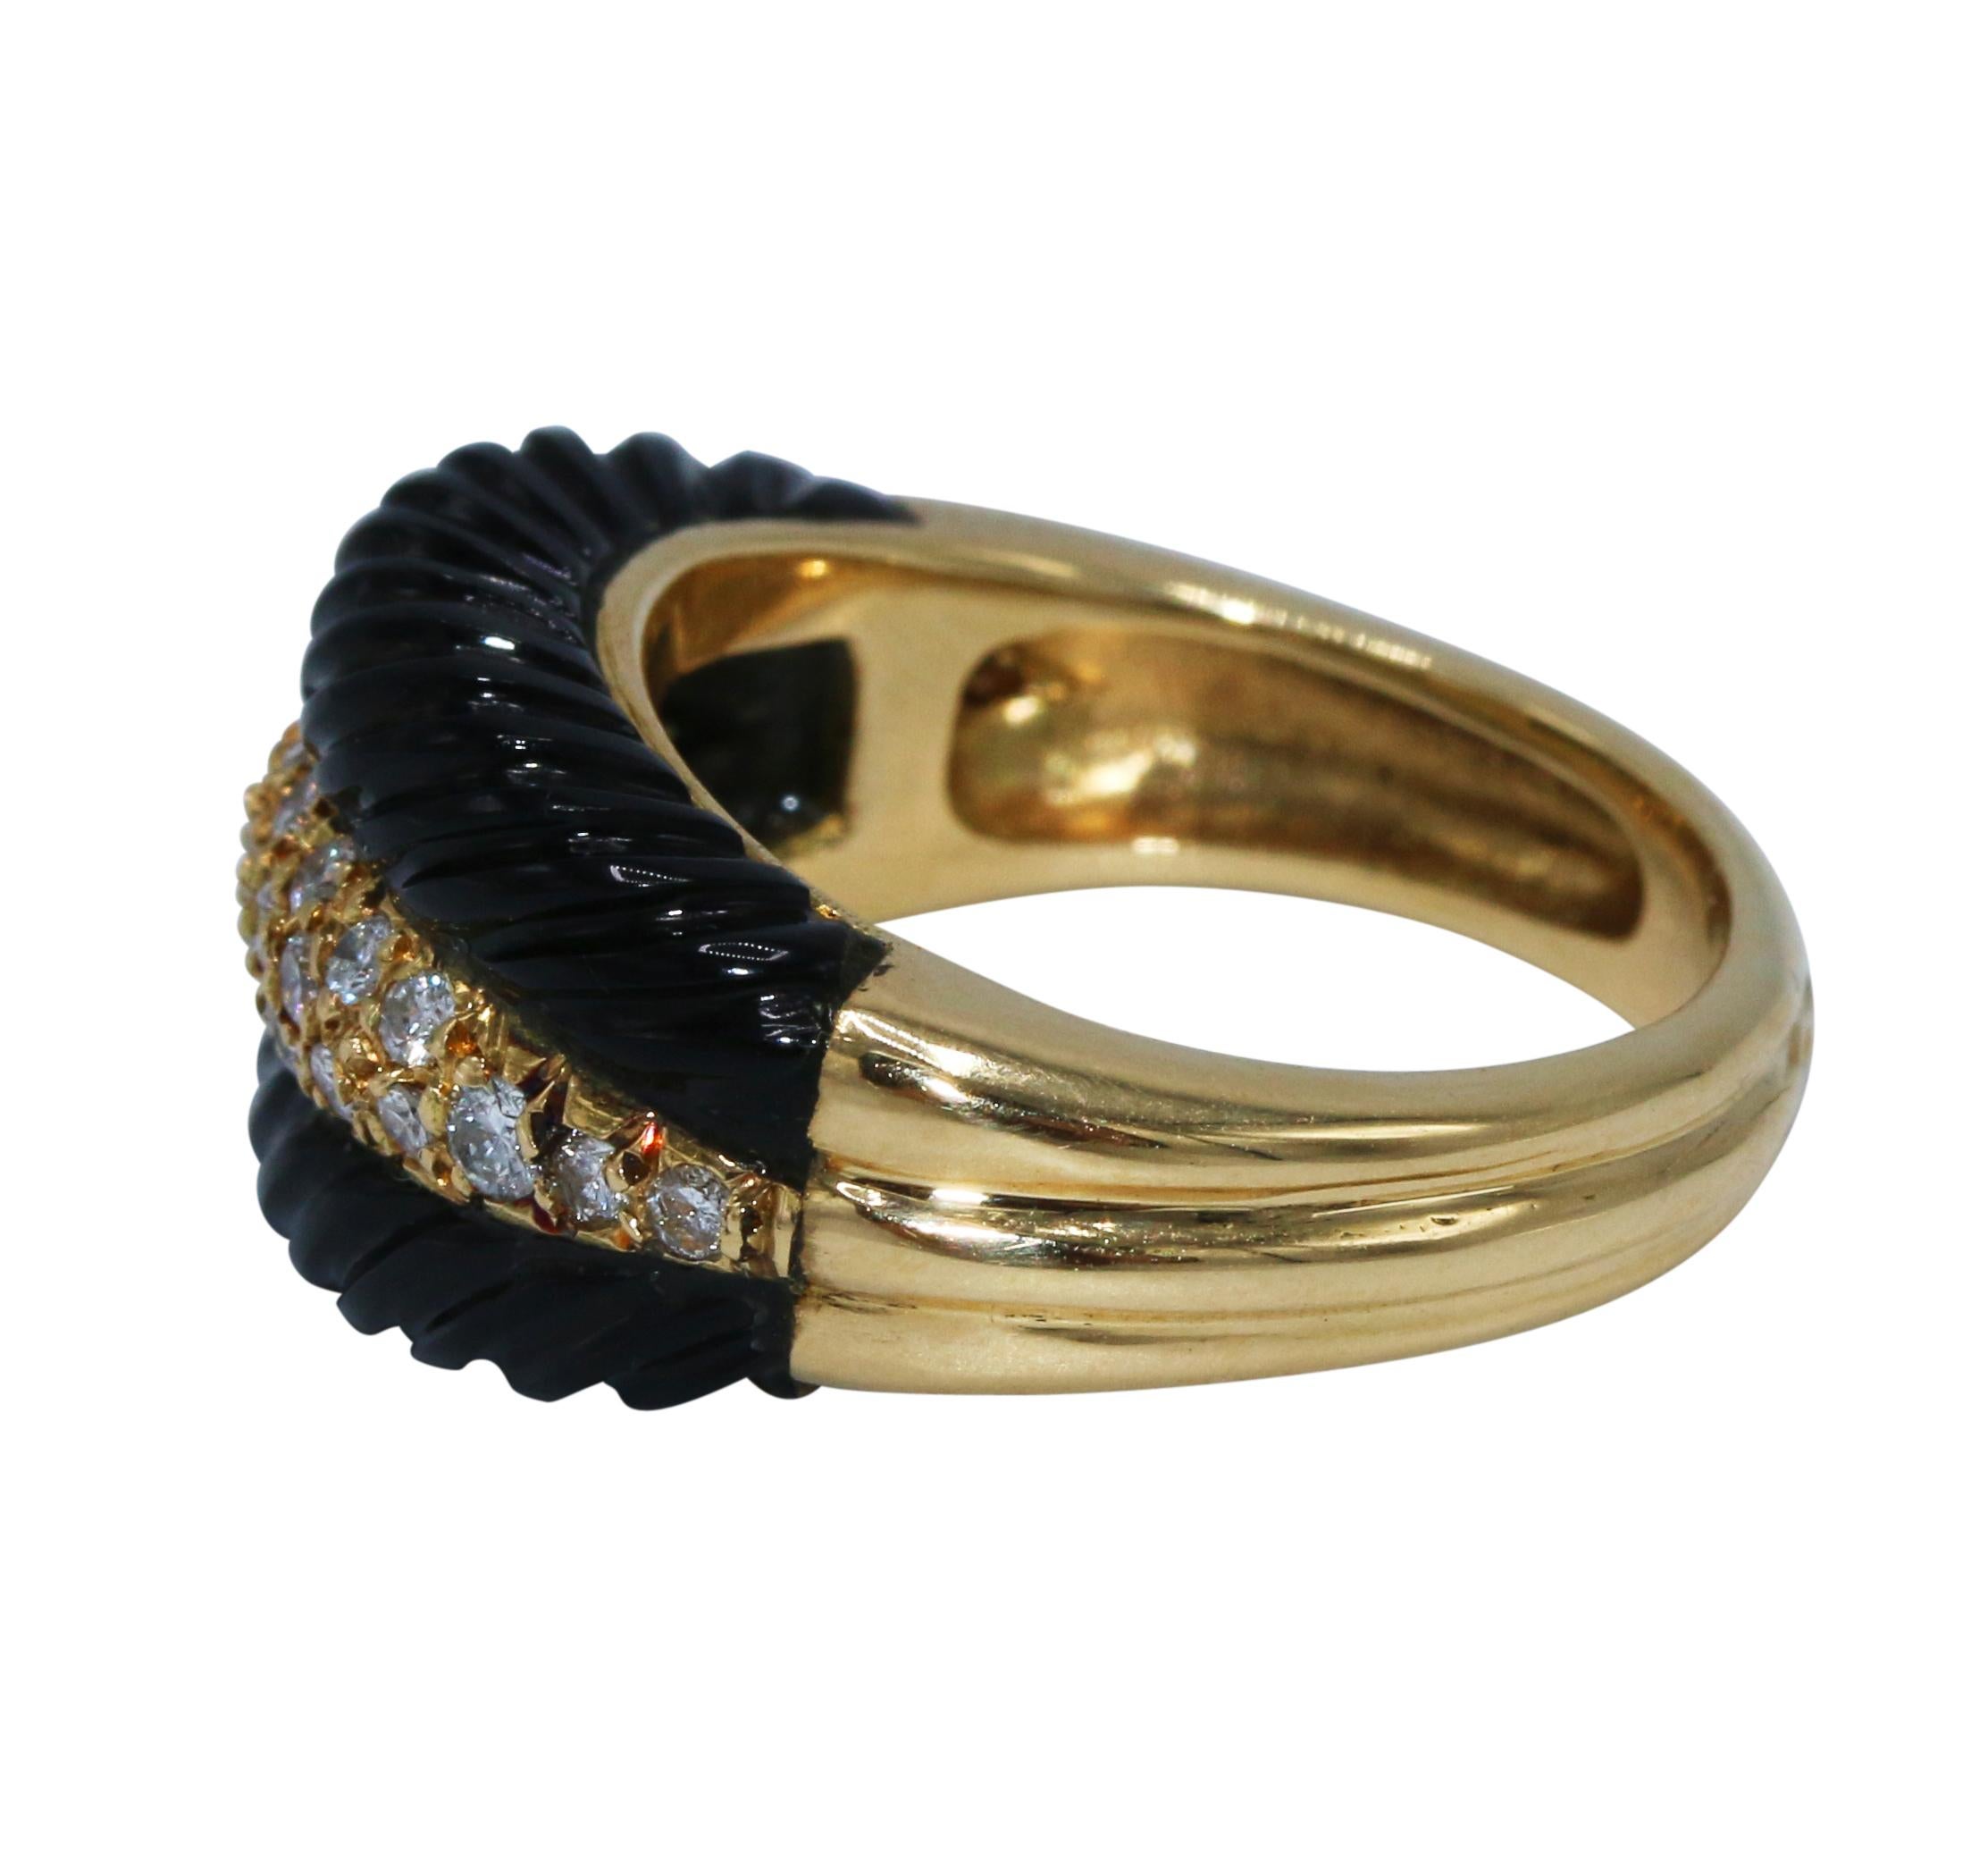 18 karat yellow gold, onyx and diamond ring, of tapered design set down the center with round diamonds weighing approximately 0.50 carat, flanked by sections of fluted onyx, gross weight 9.2 gram, size 6, with workshop marks.
A beautiful ring